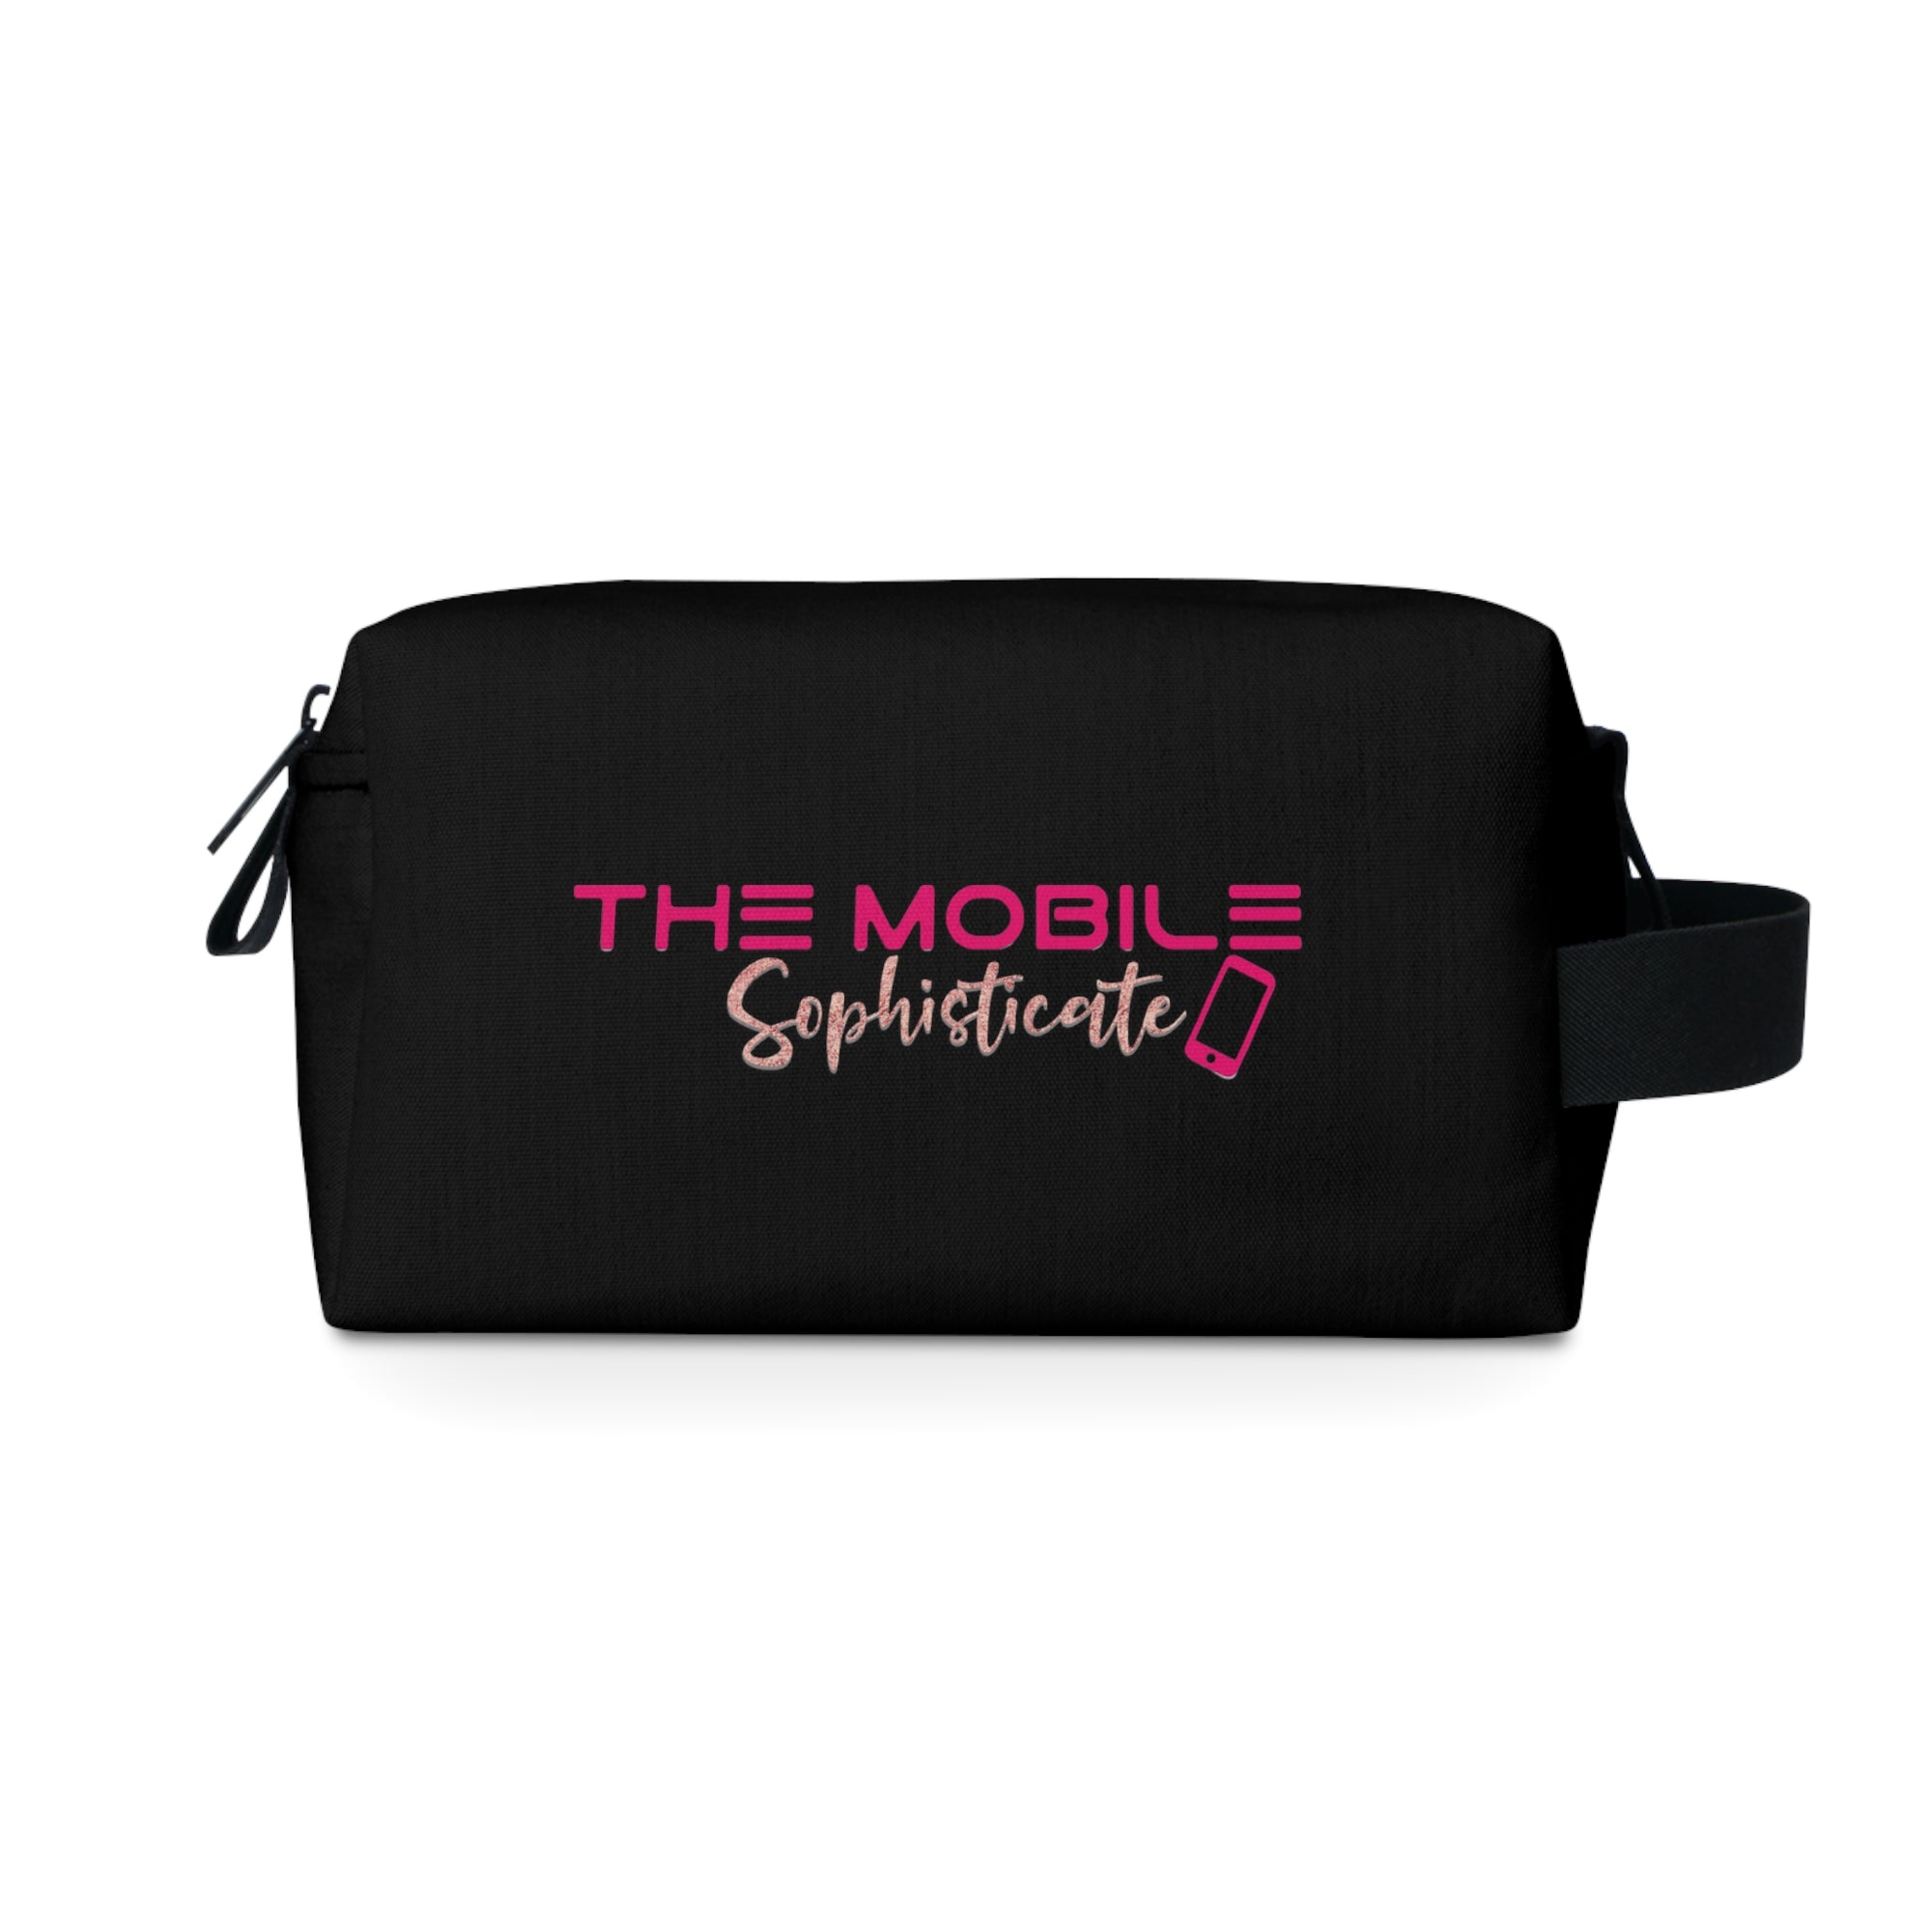 The Mobile Sophisticate Toiletry Bag